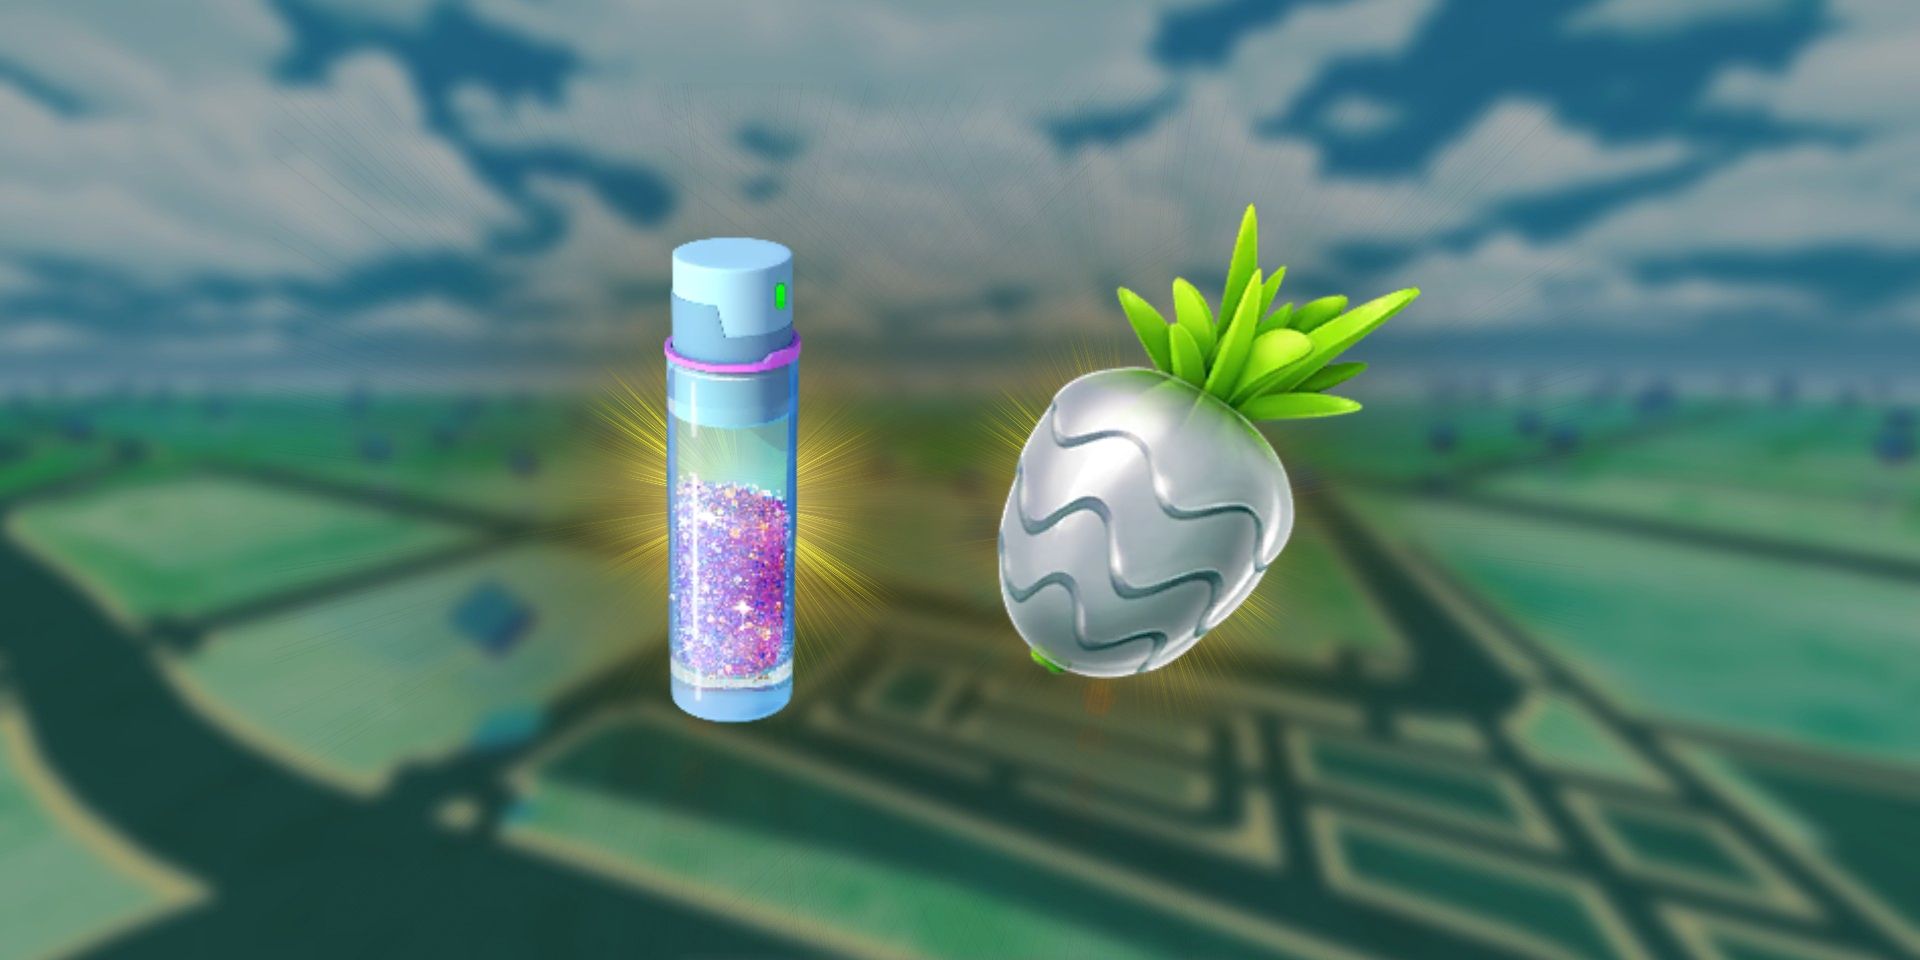 Pokemon GO's Stardust and a Silver Pinap Berry with the blurred-out Pokémon GO map in the background.